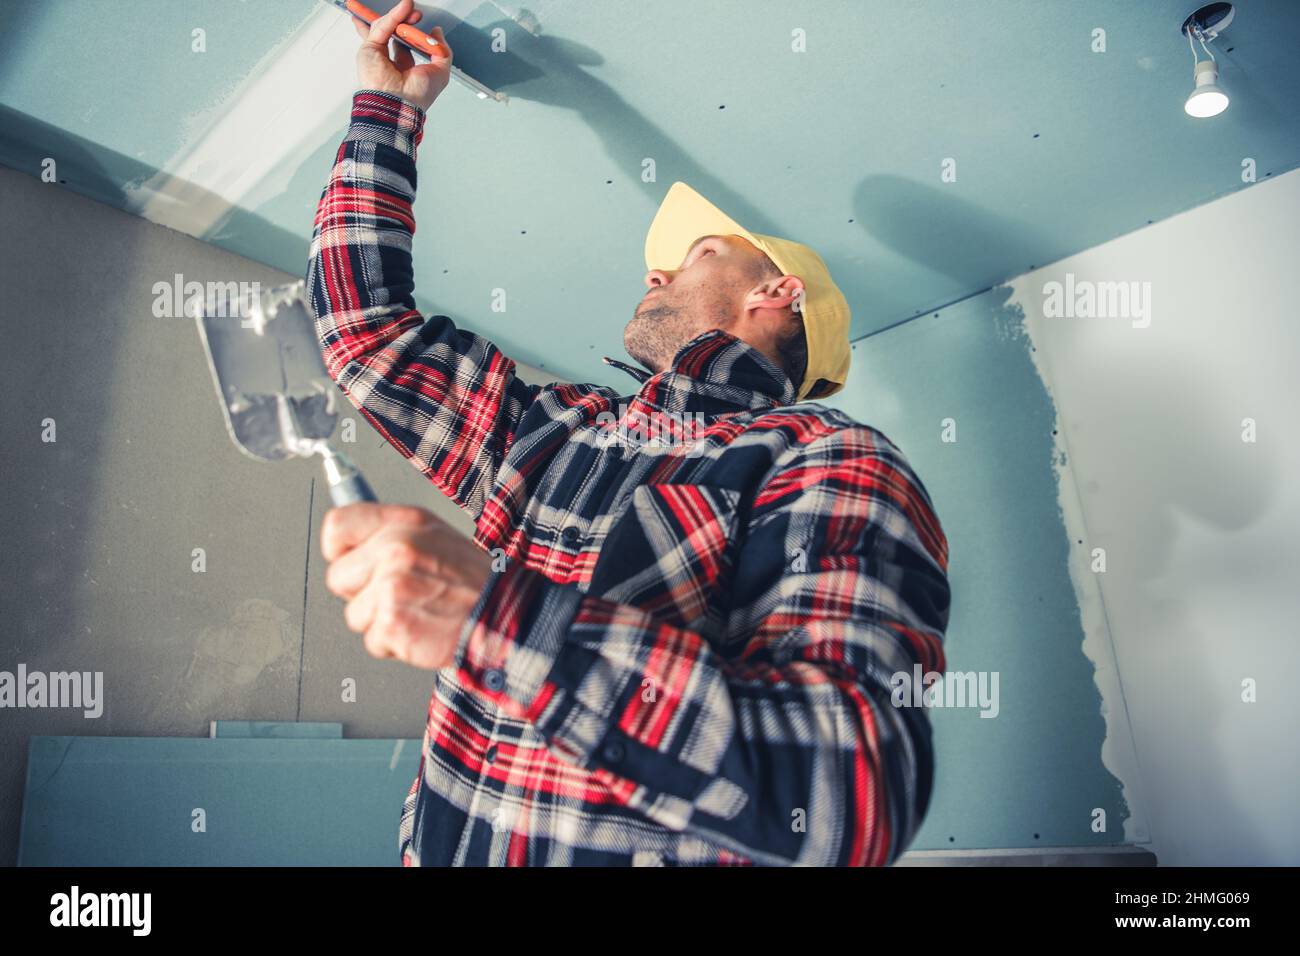 Caucasian Professional Interior Finishing Worker in His 40s Patching Room Ceiling. Apartment Remodeling Home Improvement Job. Stock Photo